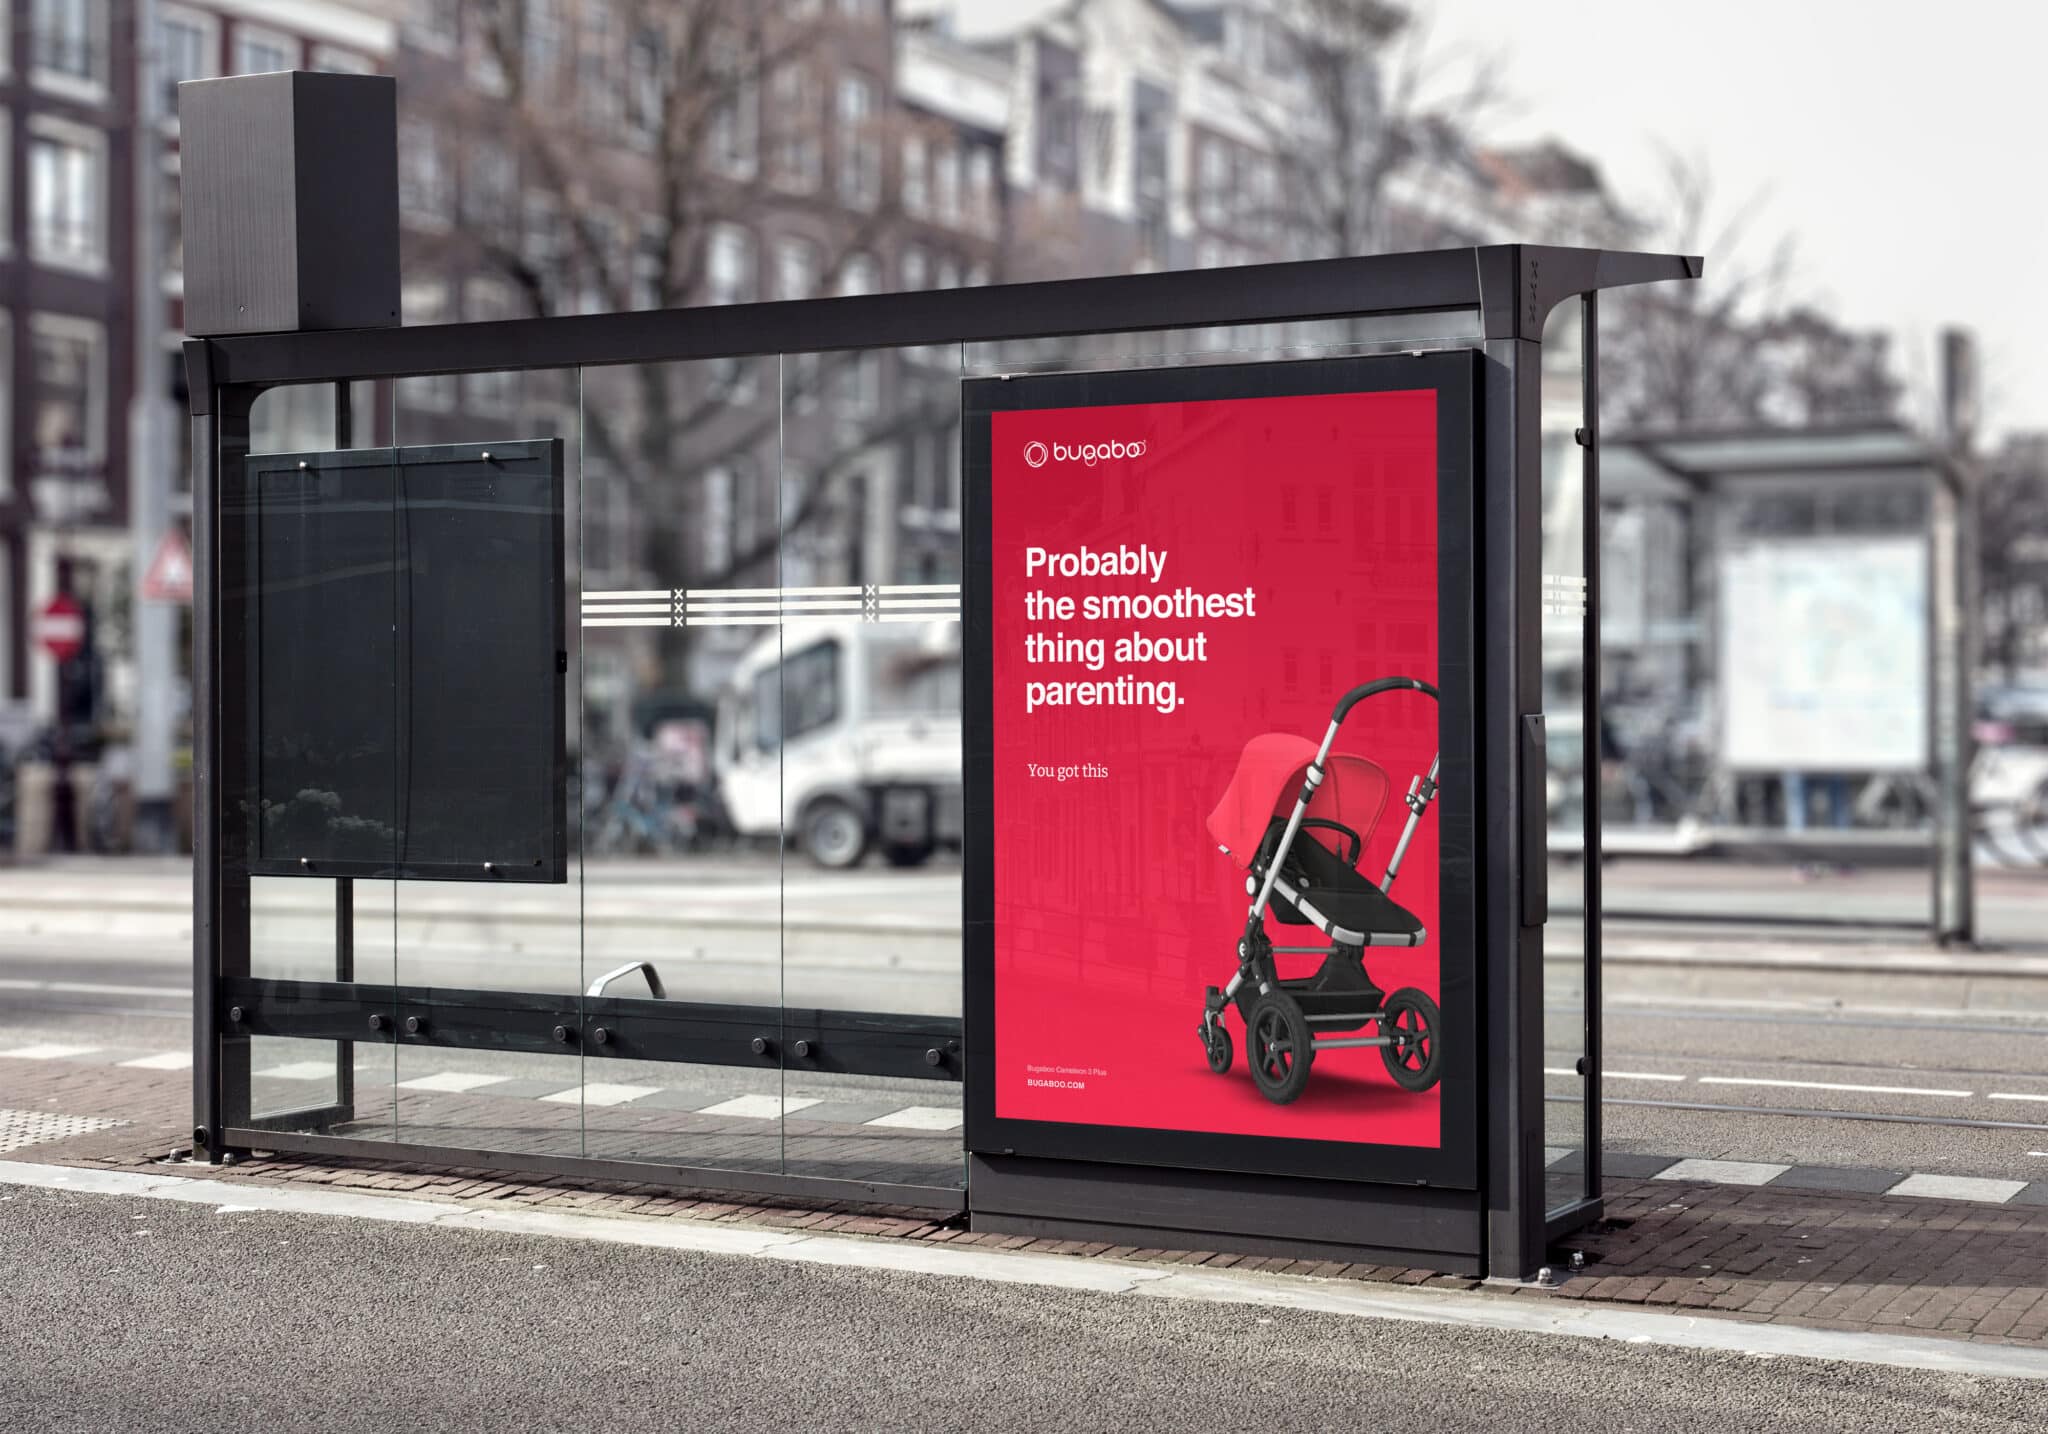 A bus stop with a glass enclosure and a bright red advertisement on the right showcasing Bugaboo. The ad, part of a savvy marketing campaign, features a stroller and the text, "Probably the smoothest thing about parenting. Stroller not included. Terms apply." Urban street background is slightly blurred.